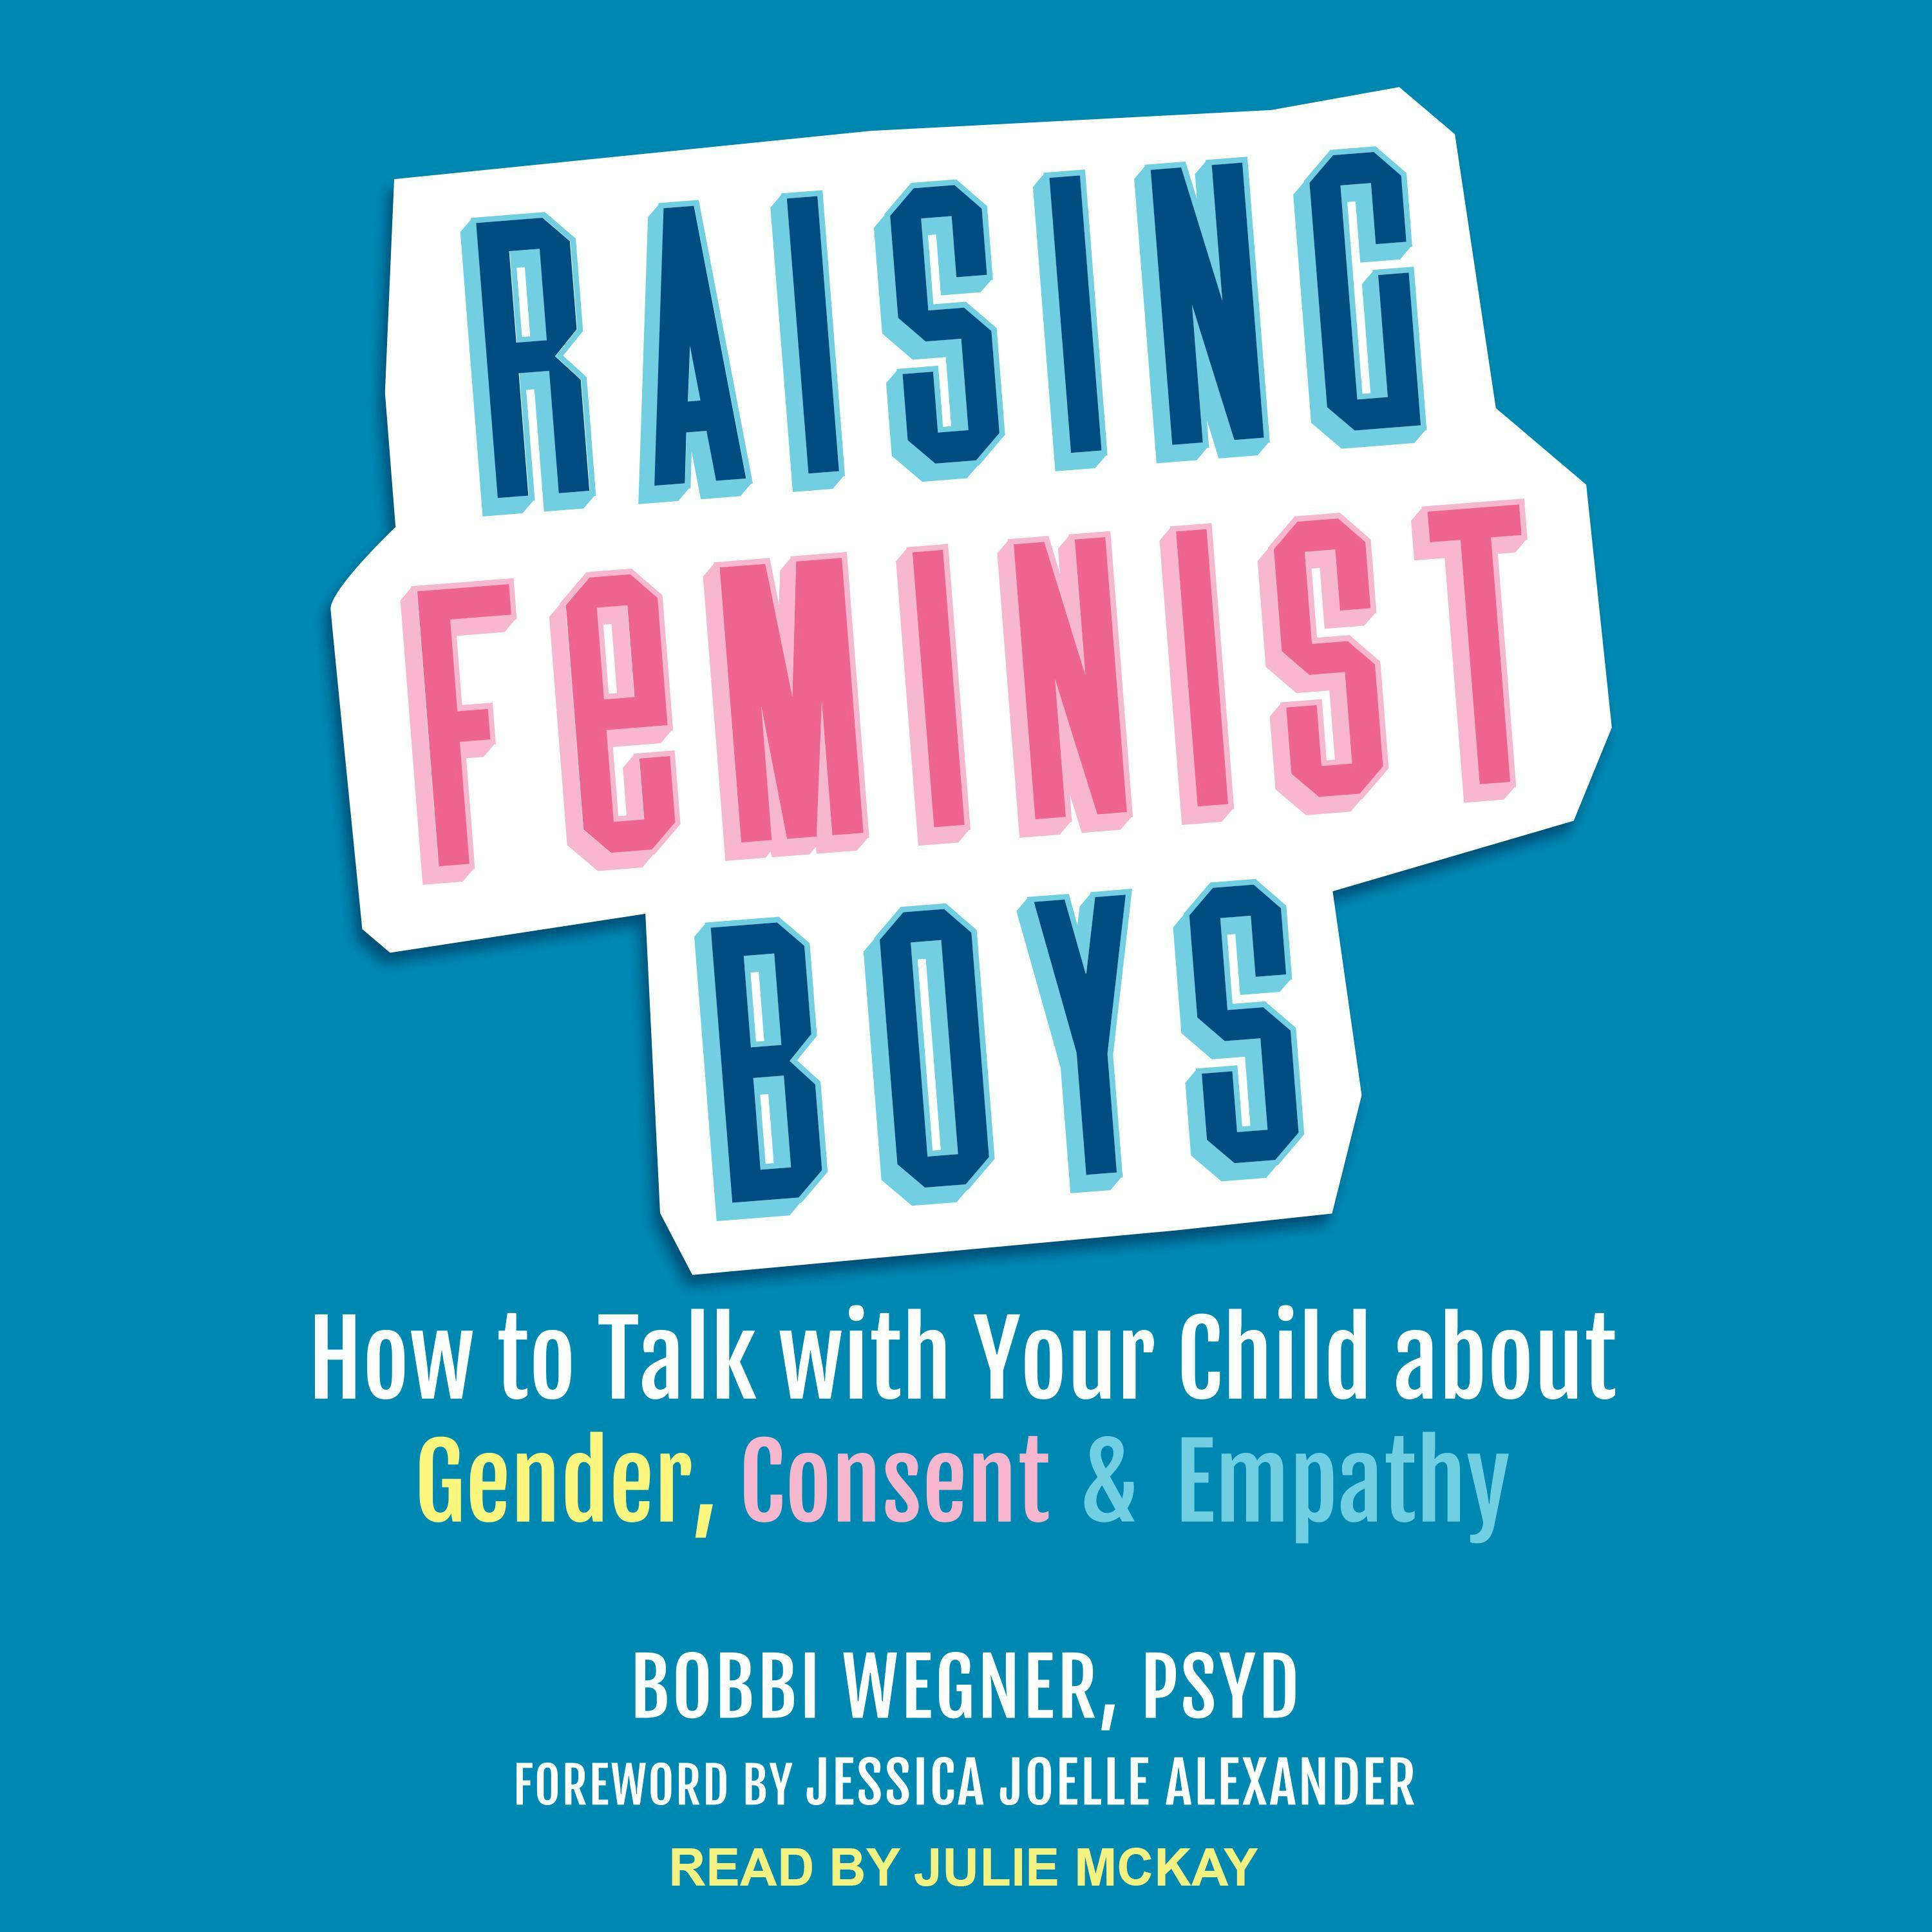 Raising Feminist Boys: How to Talk with Your Child About Gender, Consent, and Empathy - PsyD Bobbi Wegner